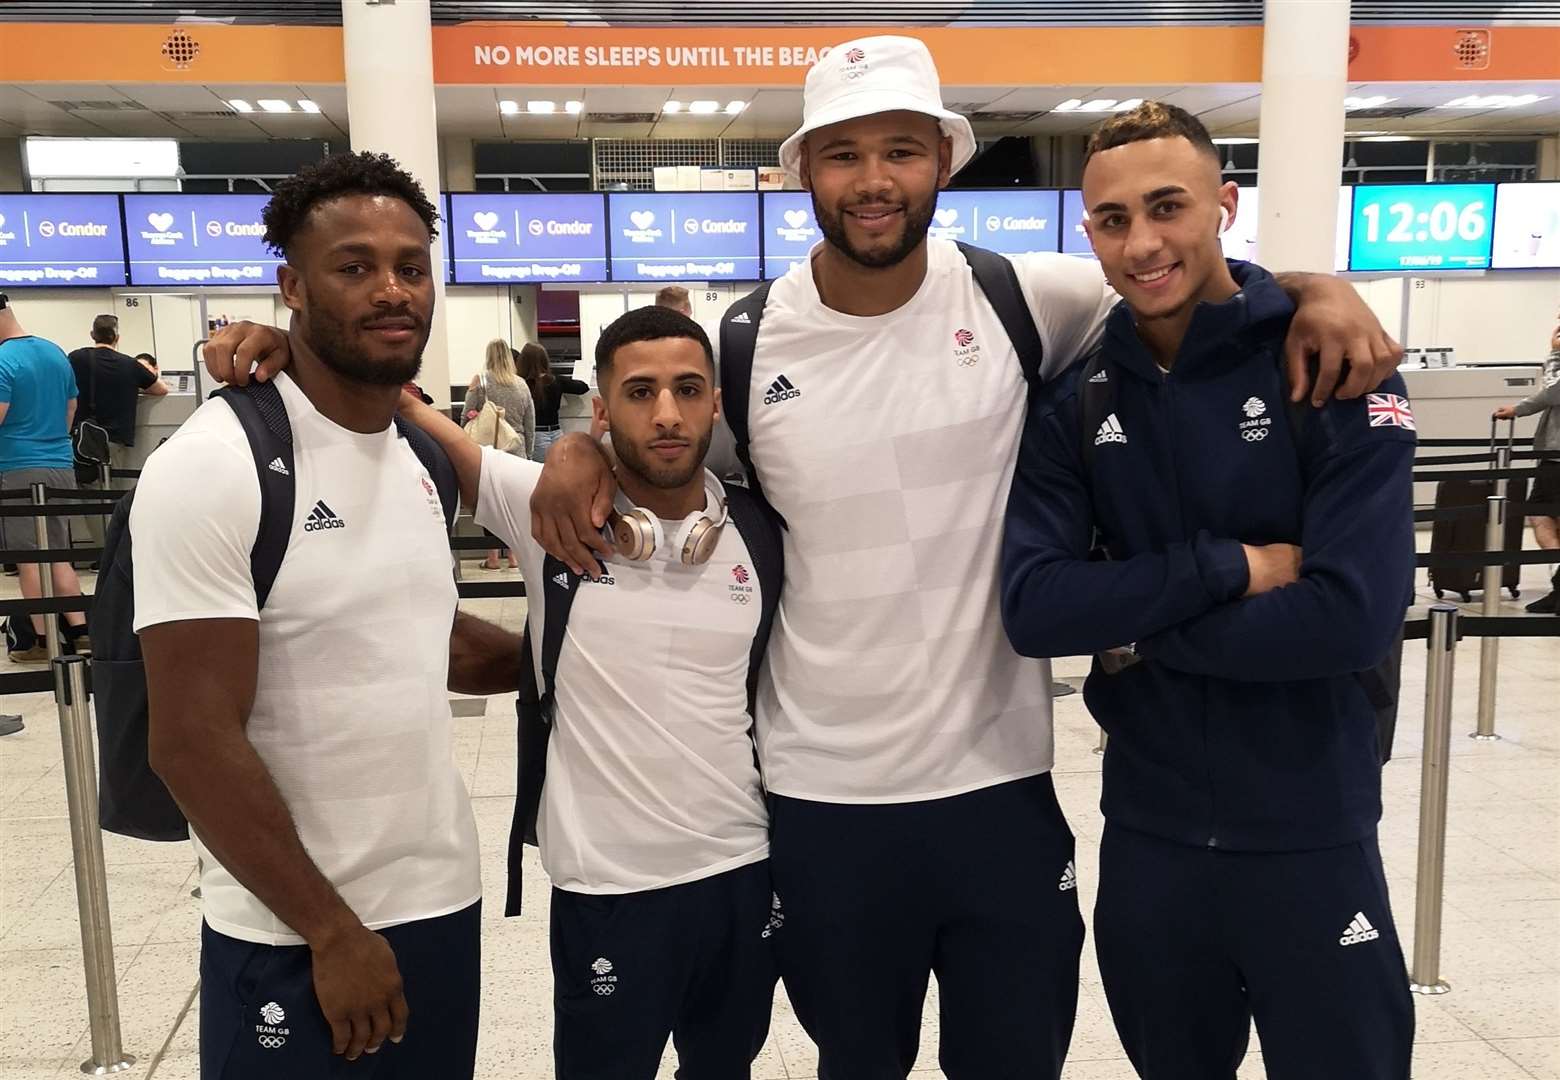 Cheavon Clarke was picked for the European Games in Minsk last year with team-mates Galal Yafai, Frazer Clarke and Benjamin Whittaker